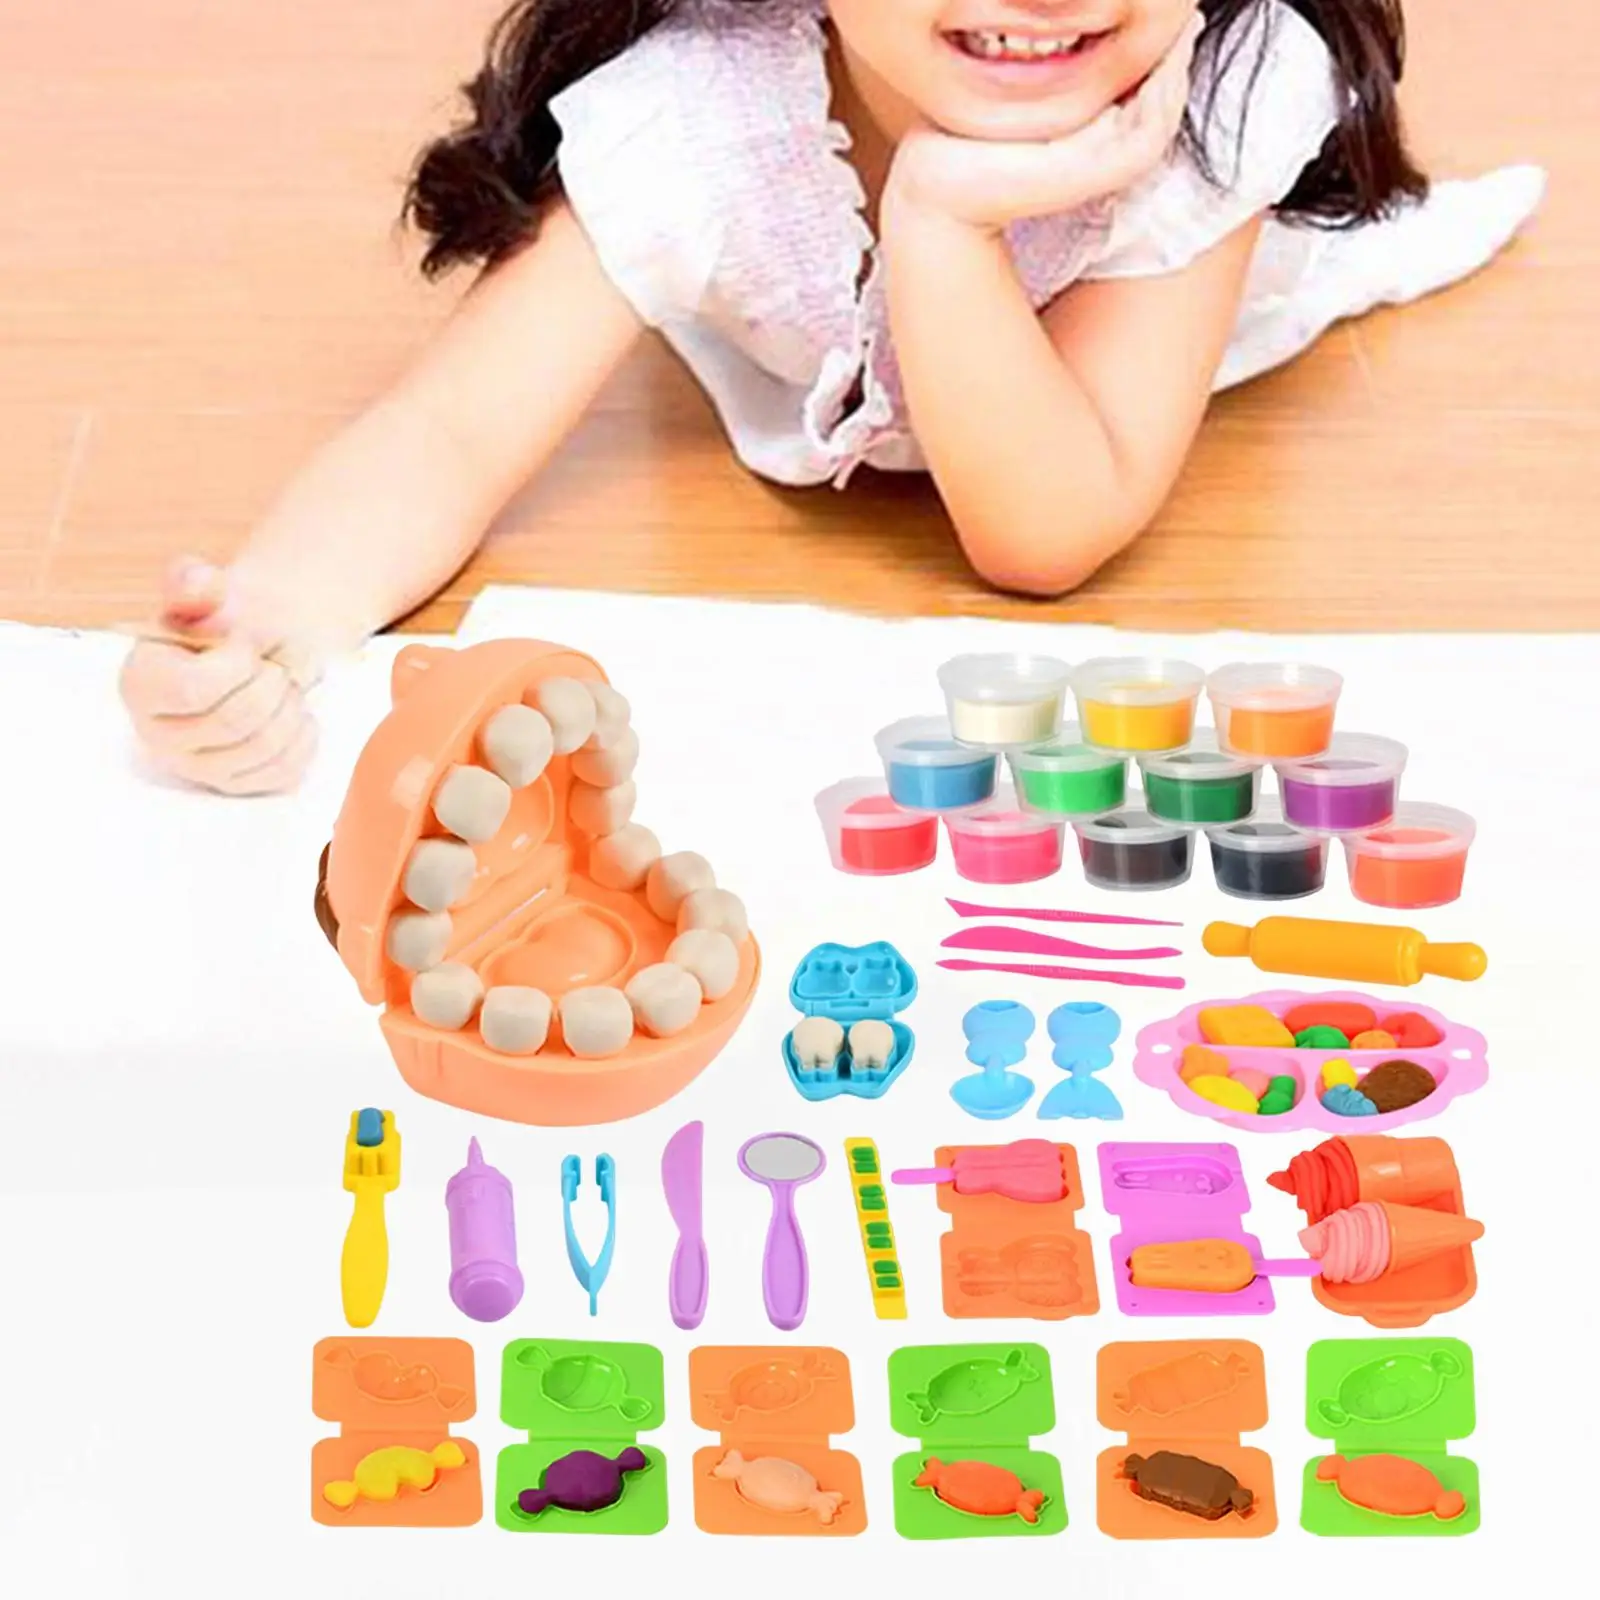 Clay Set Pretend Play DIY Models Educational 12 Colors with Accessoires Art Crafts for Toddlers Birthday Gift Children Kids